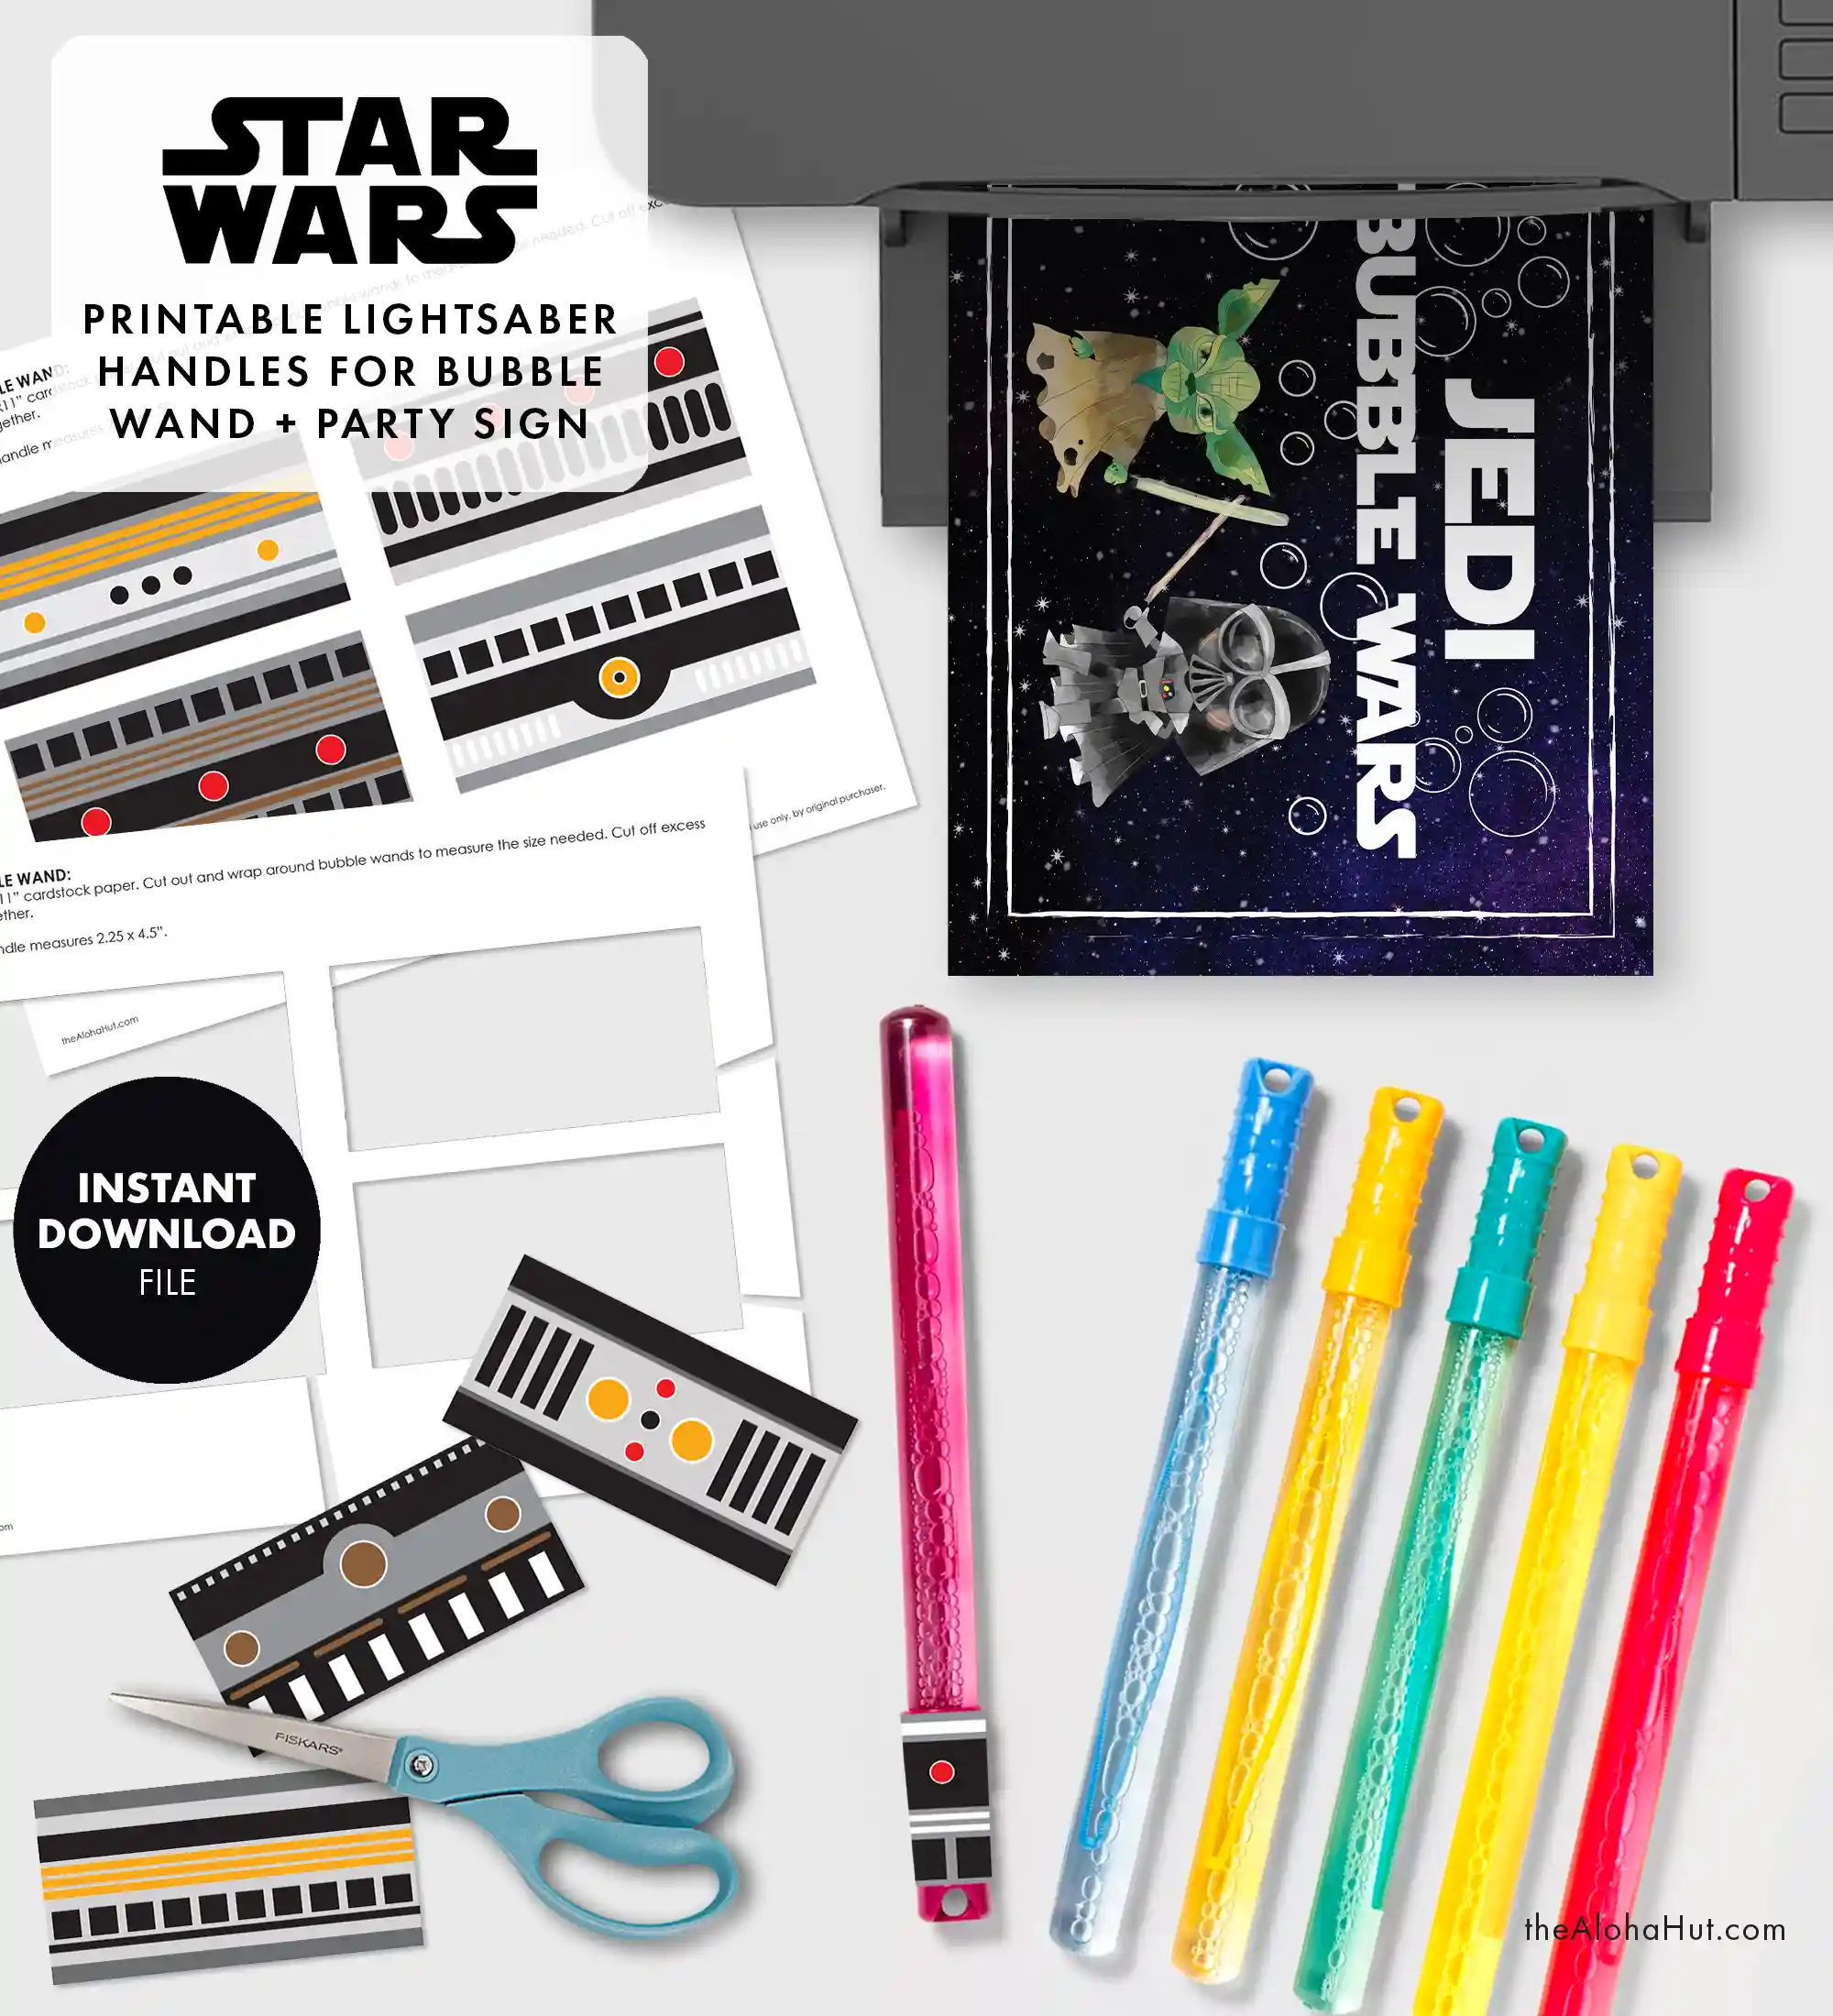 Star Wars party ideas, activities, birthday party games, decorations, and prints. Ideas and tips and tricks for throwing the best Star Wars themed kids birthday party, baby shower, or one with the force celebration. Includes Star Wars printable games, decorations (cupcake toppers, banners, gift tags, characters) and Star Wars party games (BINGO, scavenger hunt, pin the lightsaber on Yoda or Darth Vader). Jedi Bubble Wars and bubble wand lightsabers.